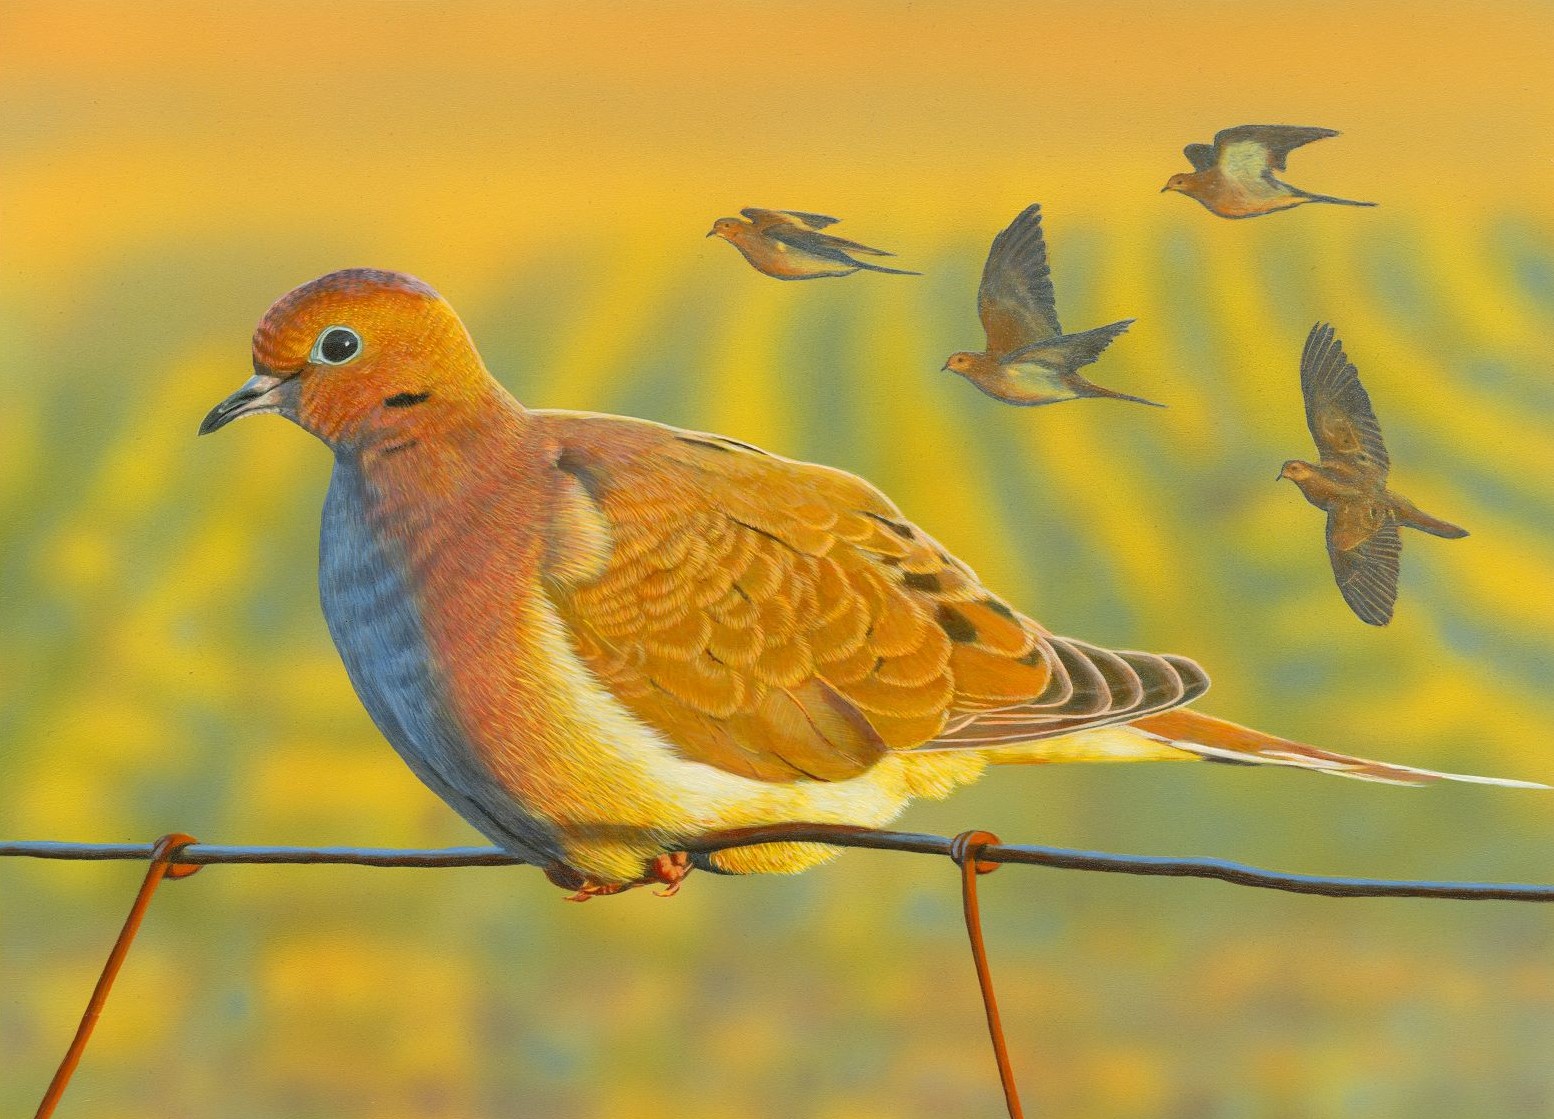 2020 mourning dove Buck Spencer - click to enlarge in new window